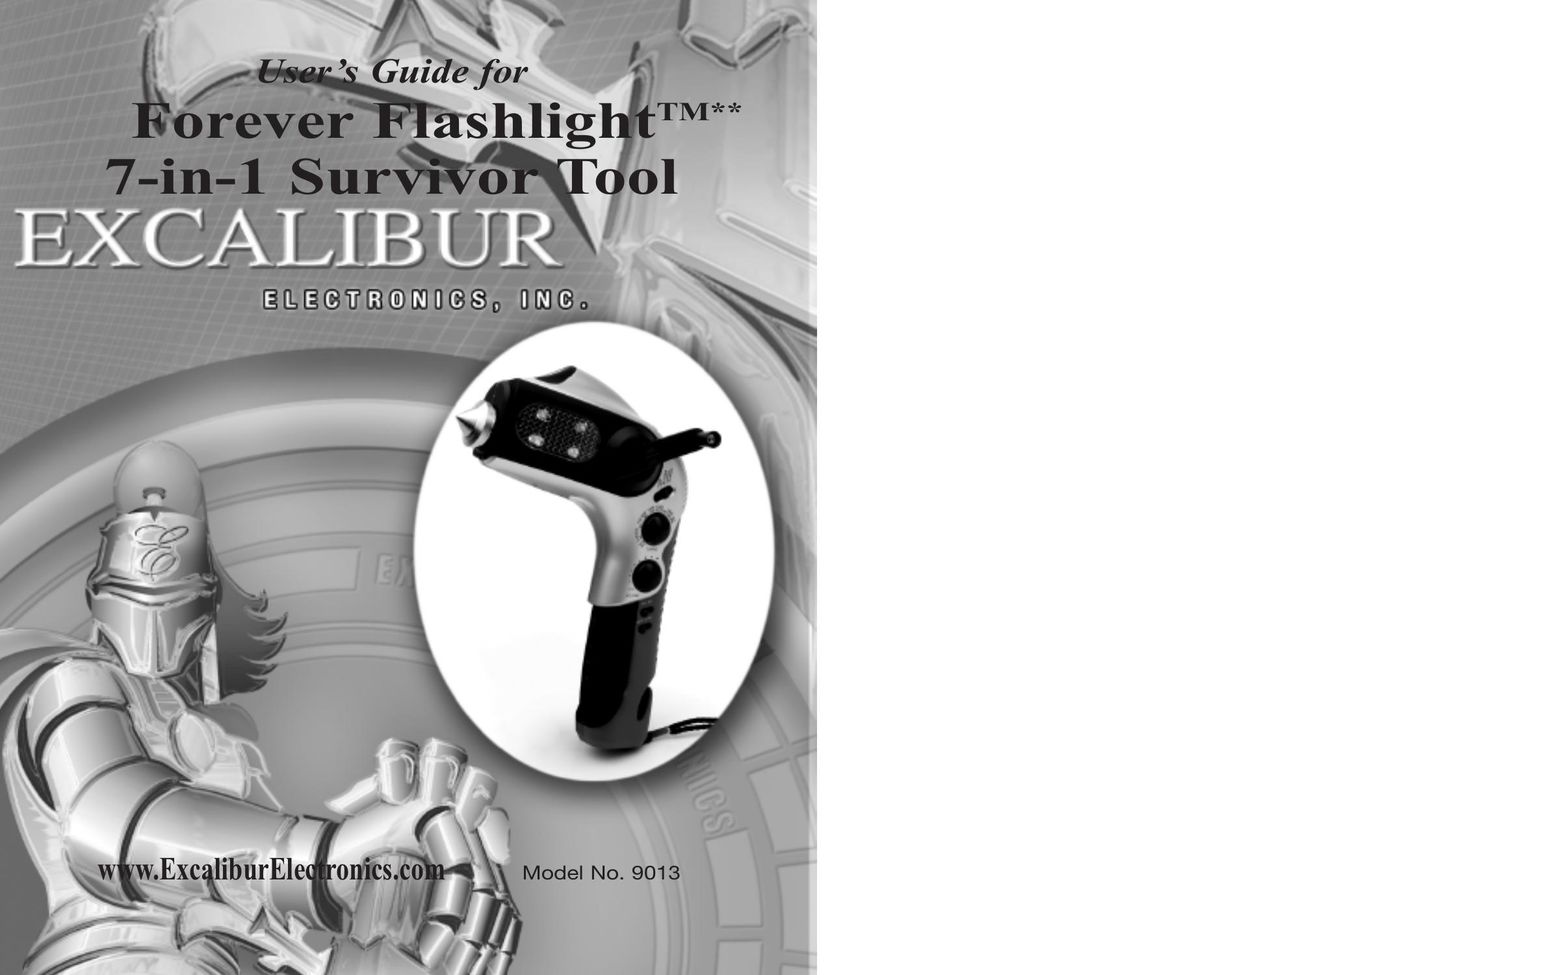 Excalibur electronic 9013 Home Safety Product User Manual